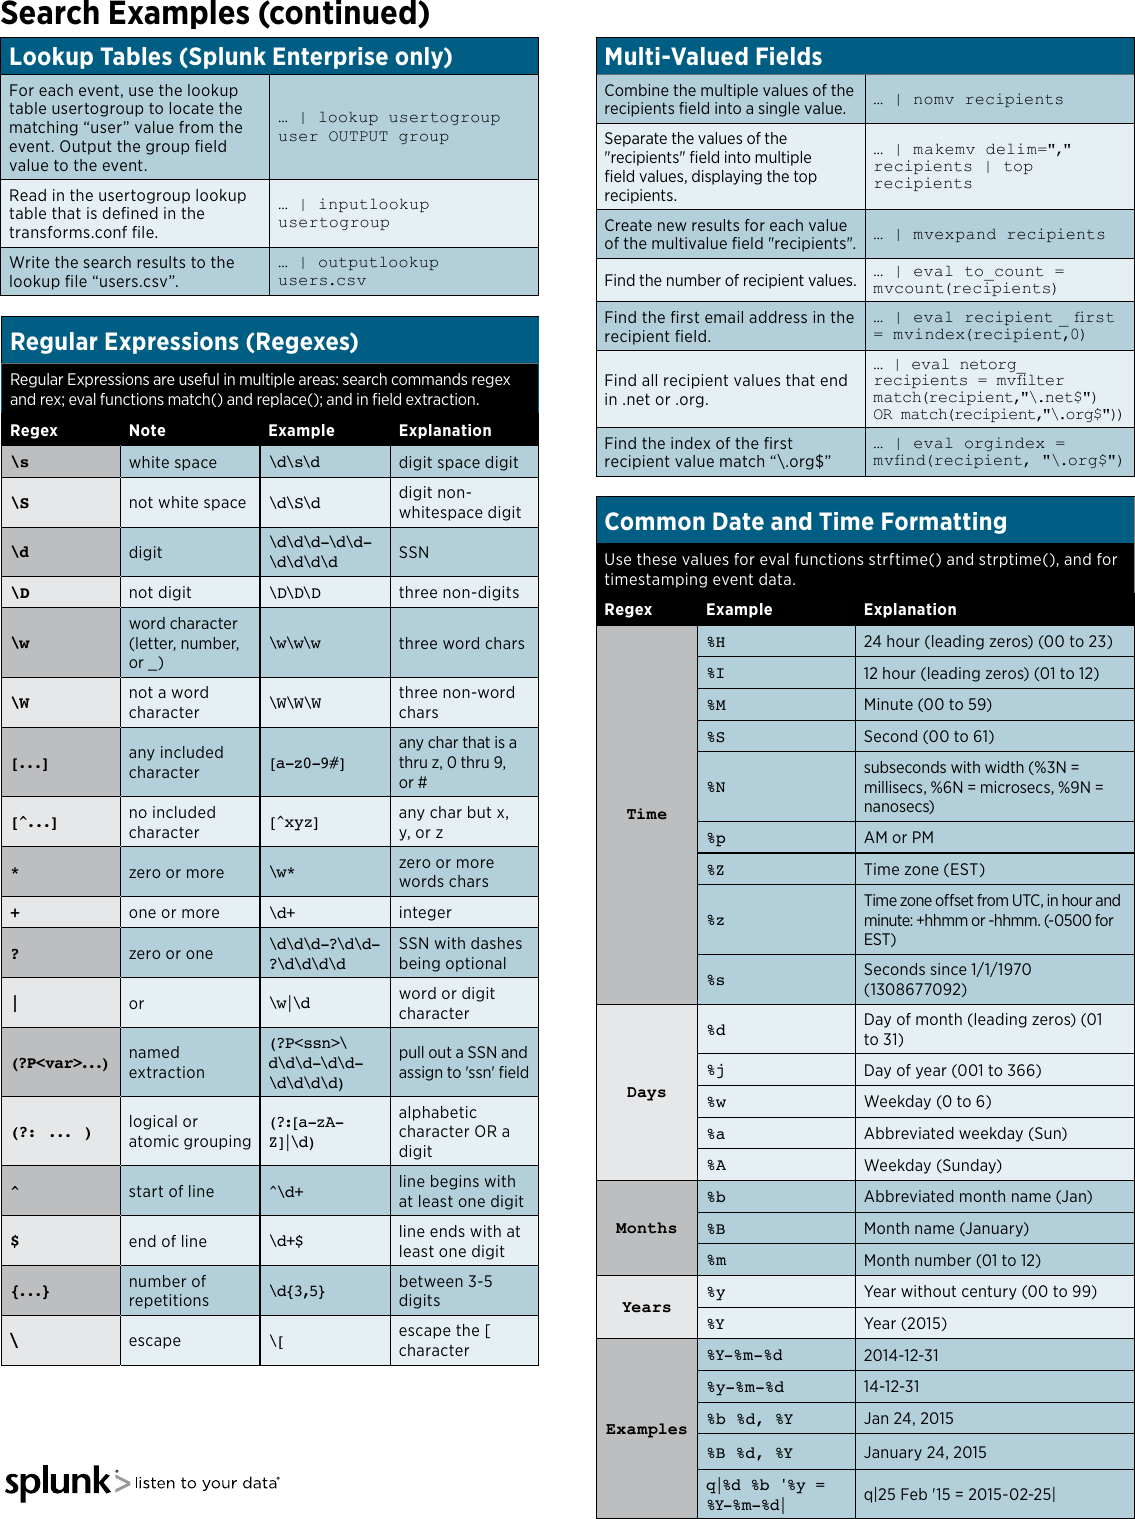 Page 6 of 6 - Splunk Quick Reference Guide